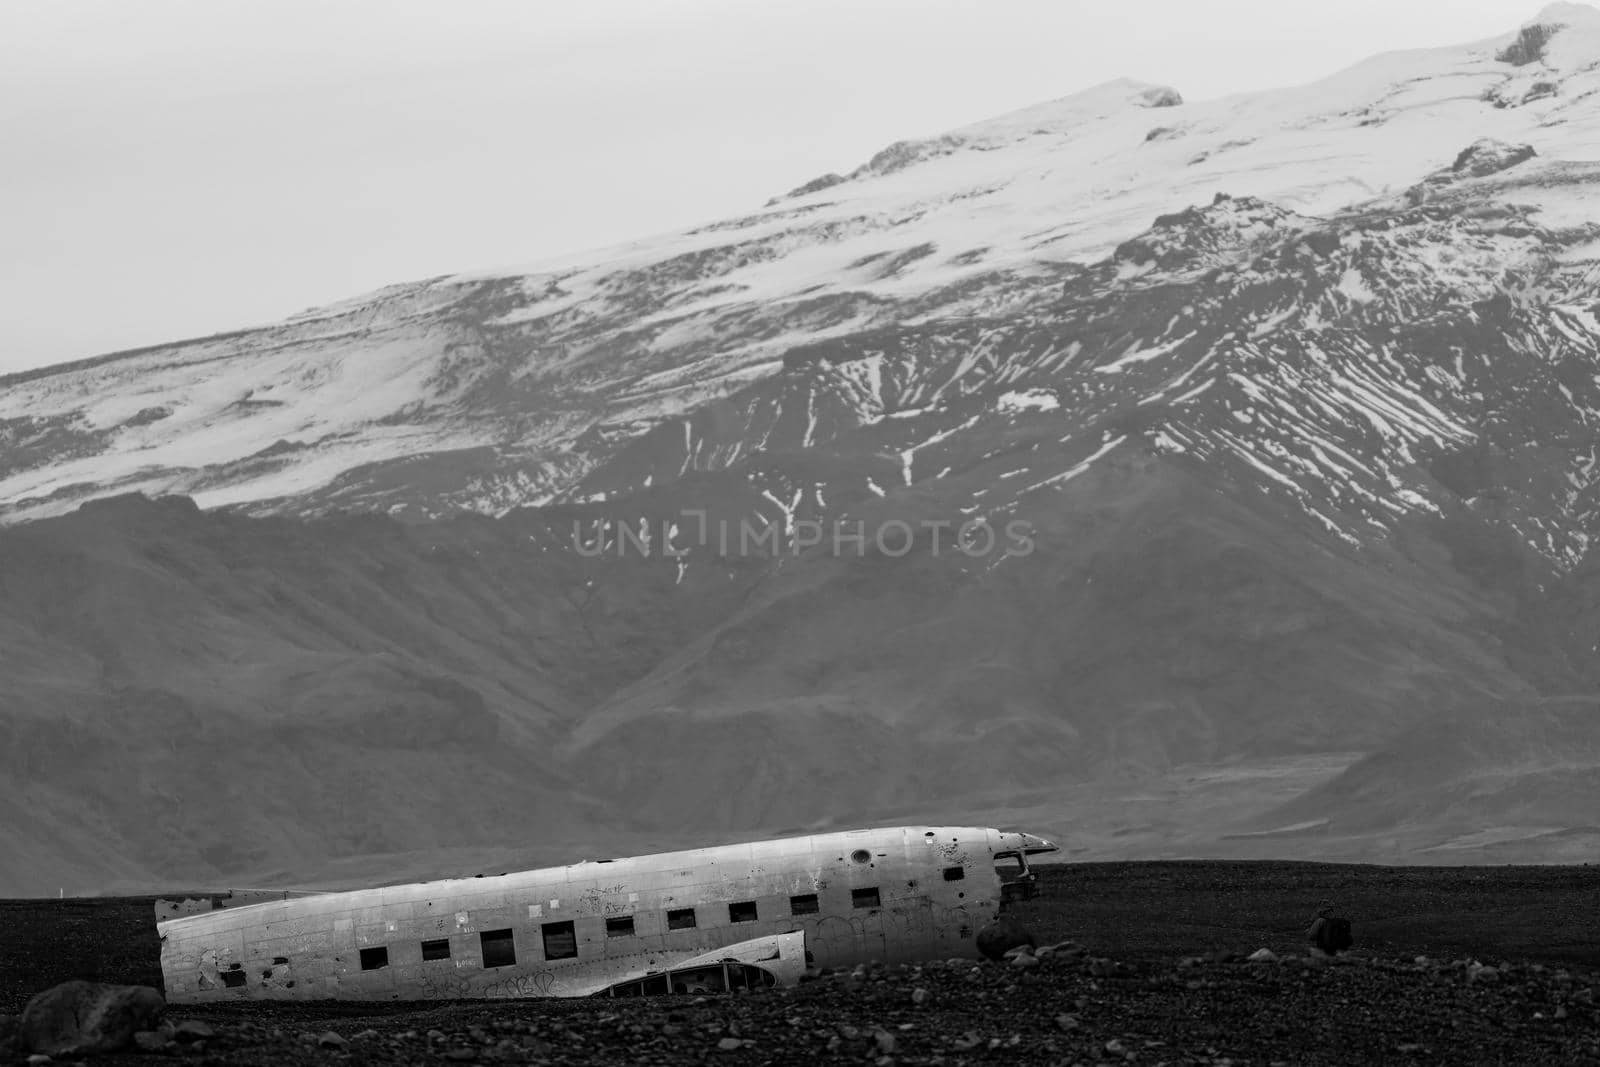 Wreck of and airplane profile and mountains in the background